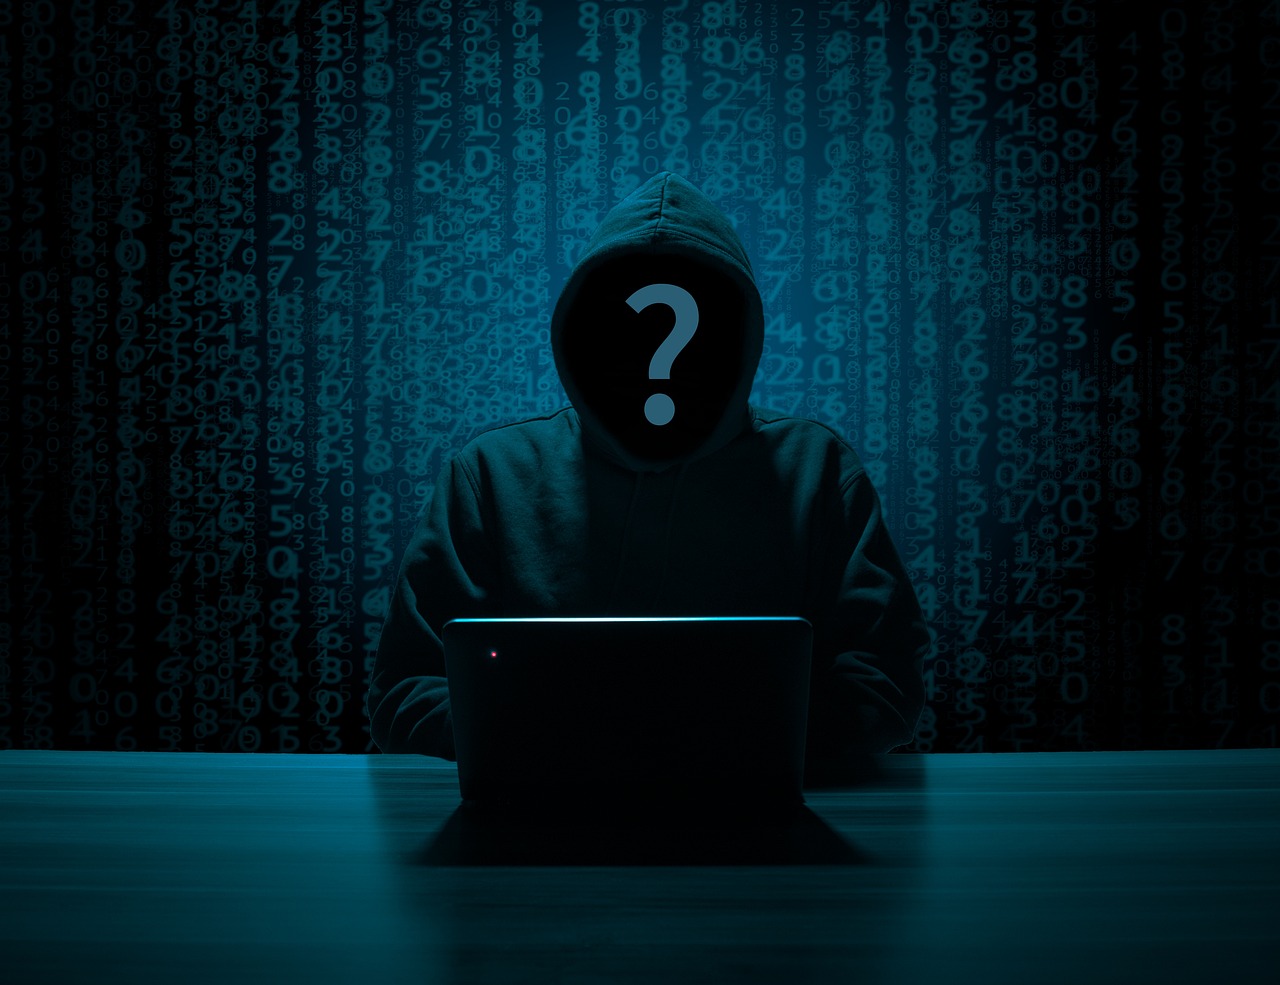 A person in a hoodie sits at a desk with a laptop, their face obscured by a question mark, against a background of blue numbers.